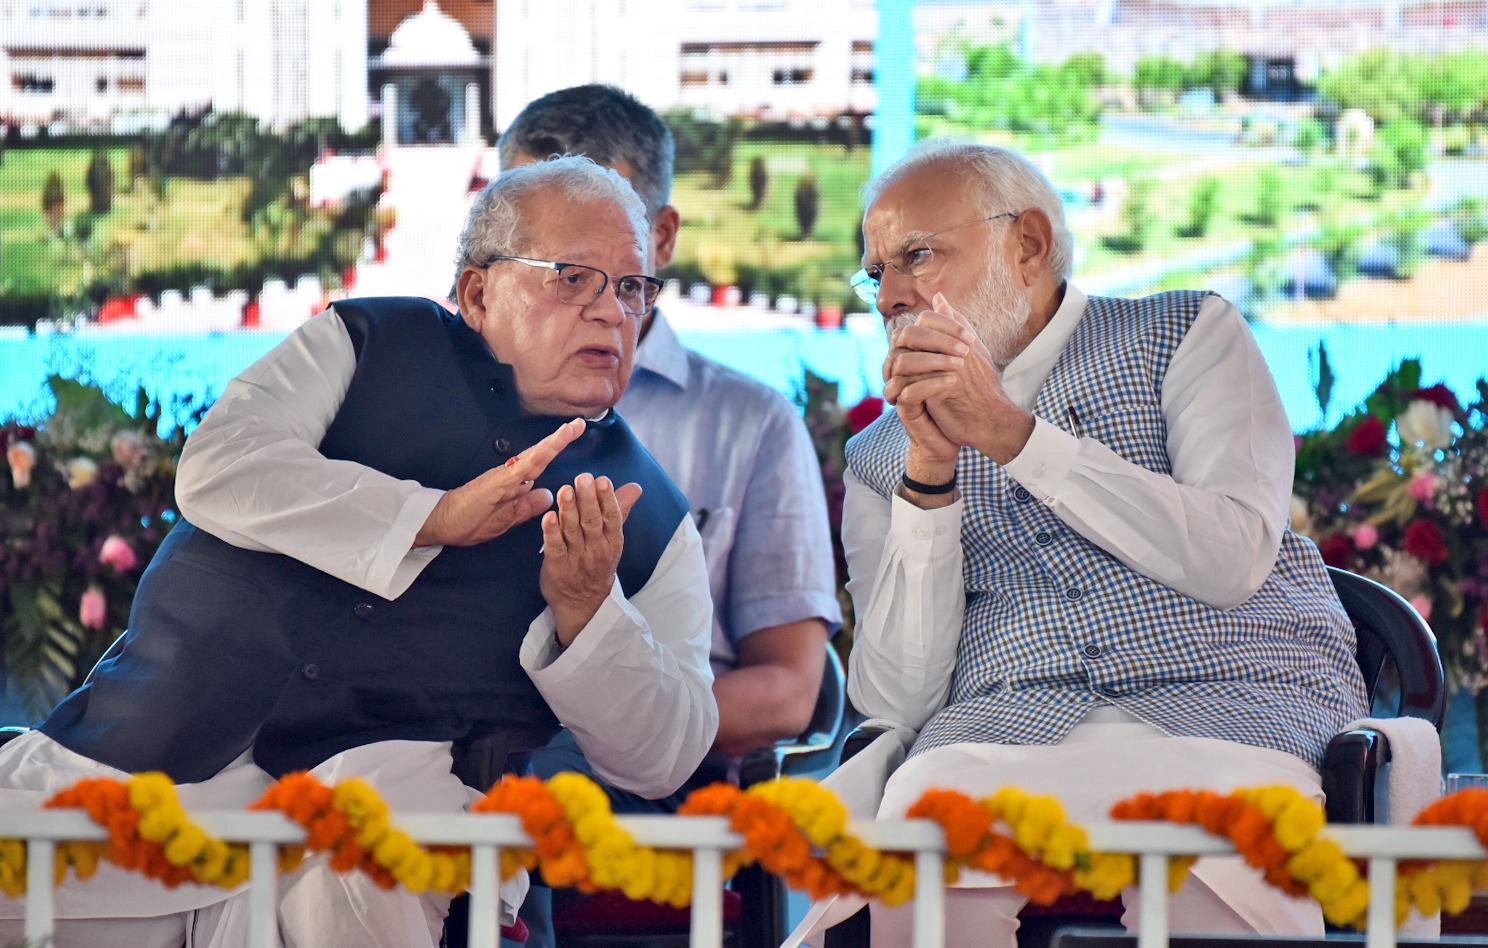 Hon'ble Governor with Hon'ble Prime Minsiter of India during inauguration event at Jodhpur